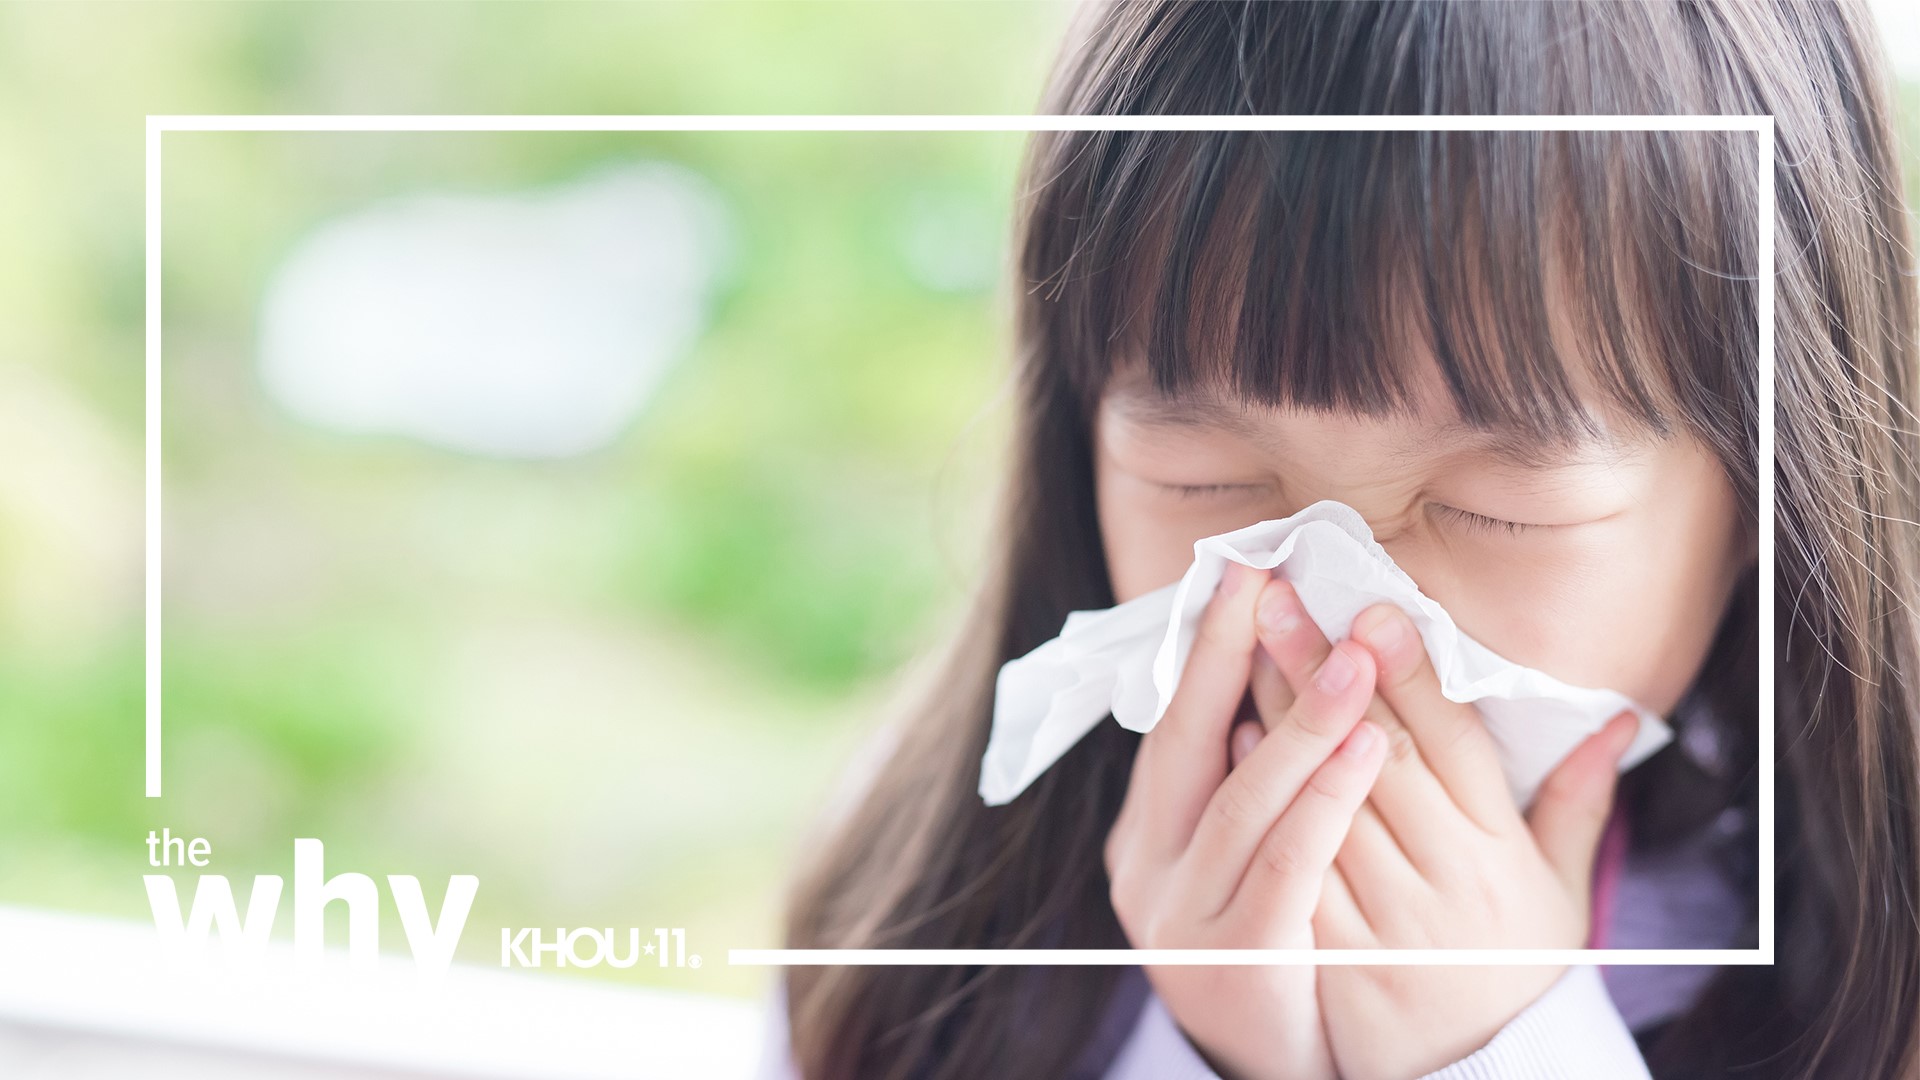 Flu, RSV and COVID could strain hospitals this winter.